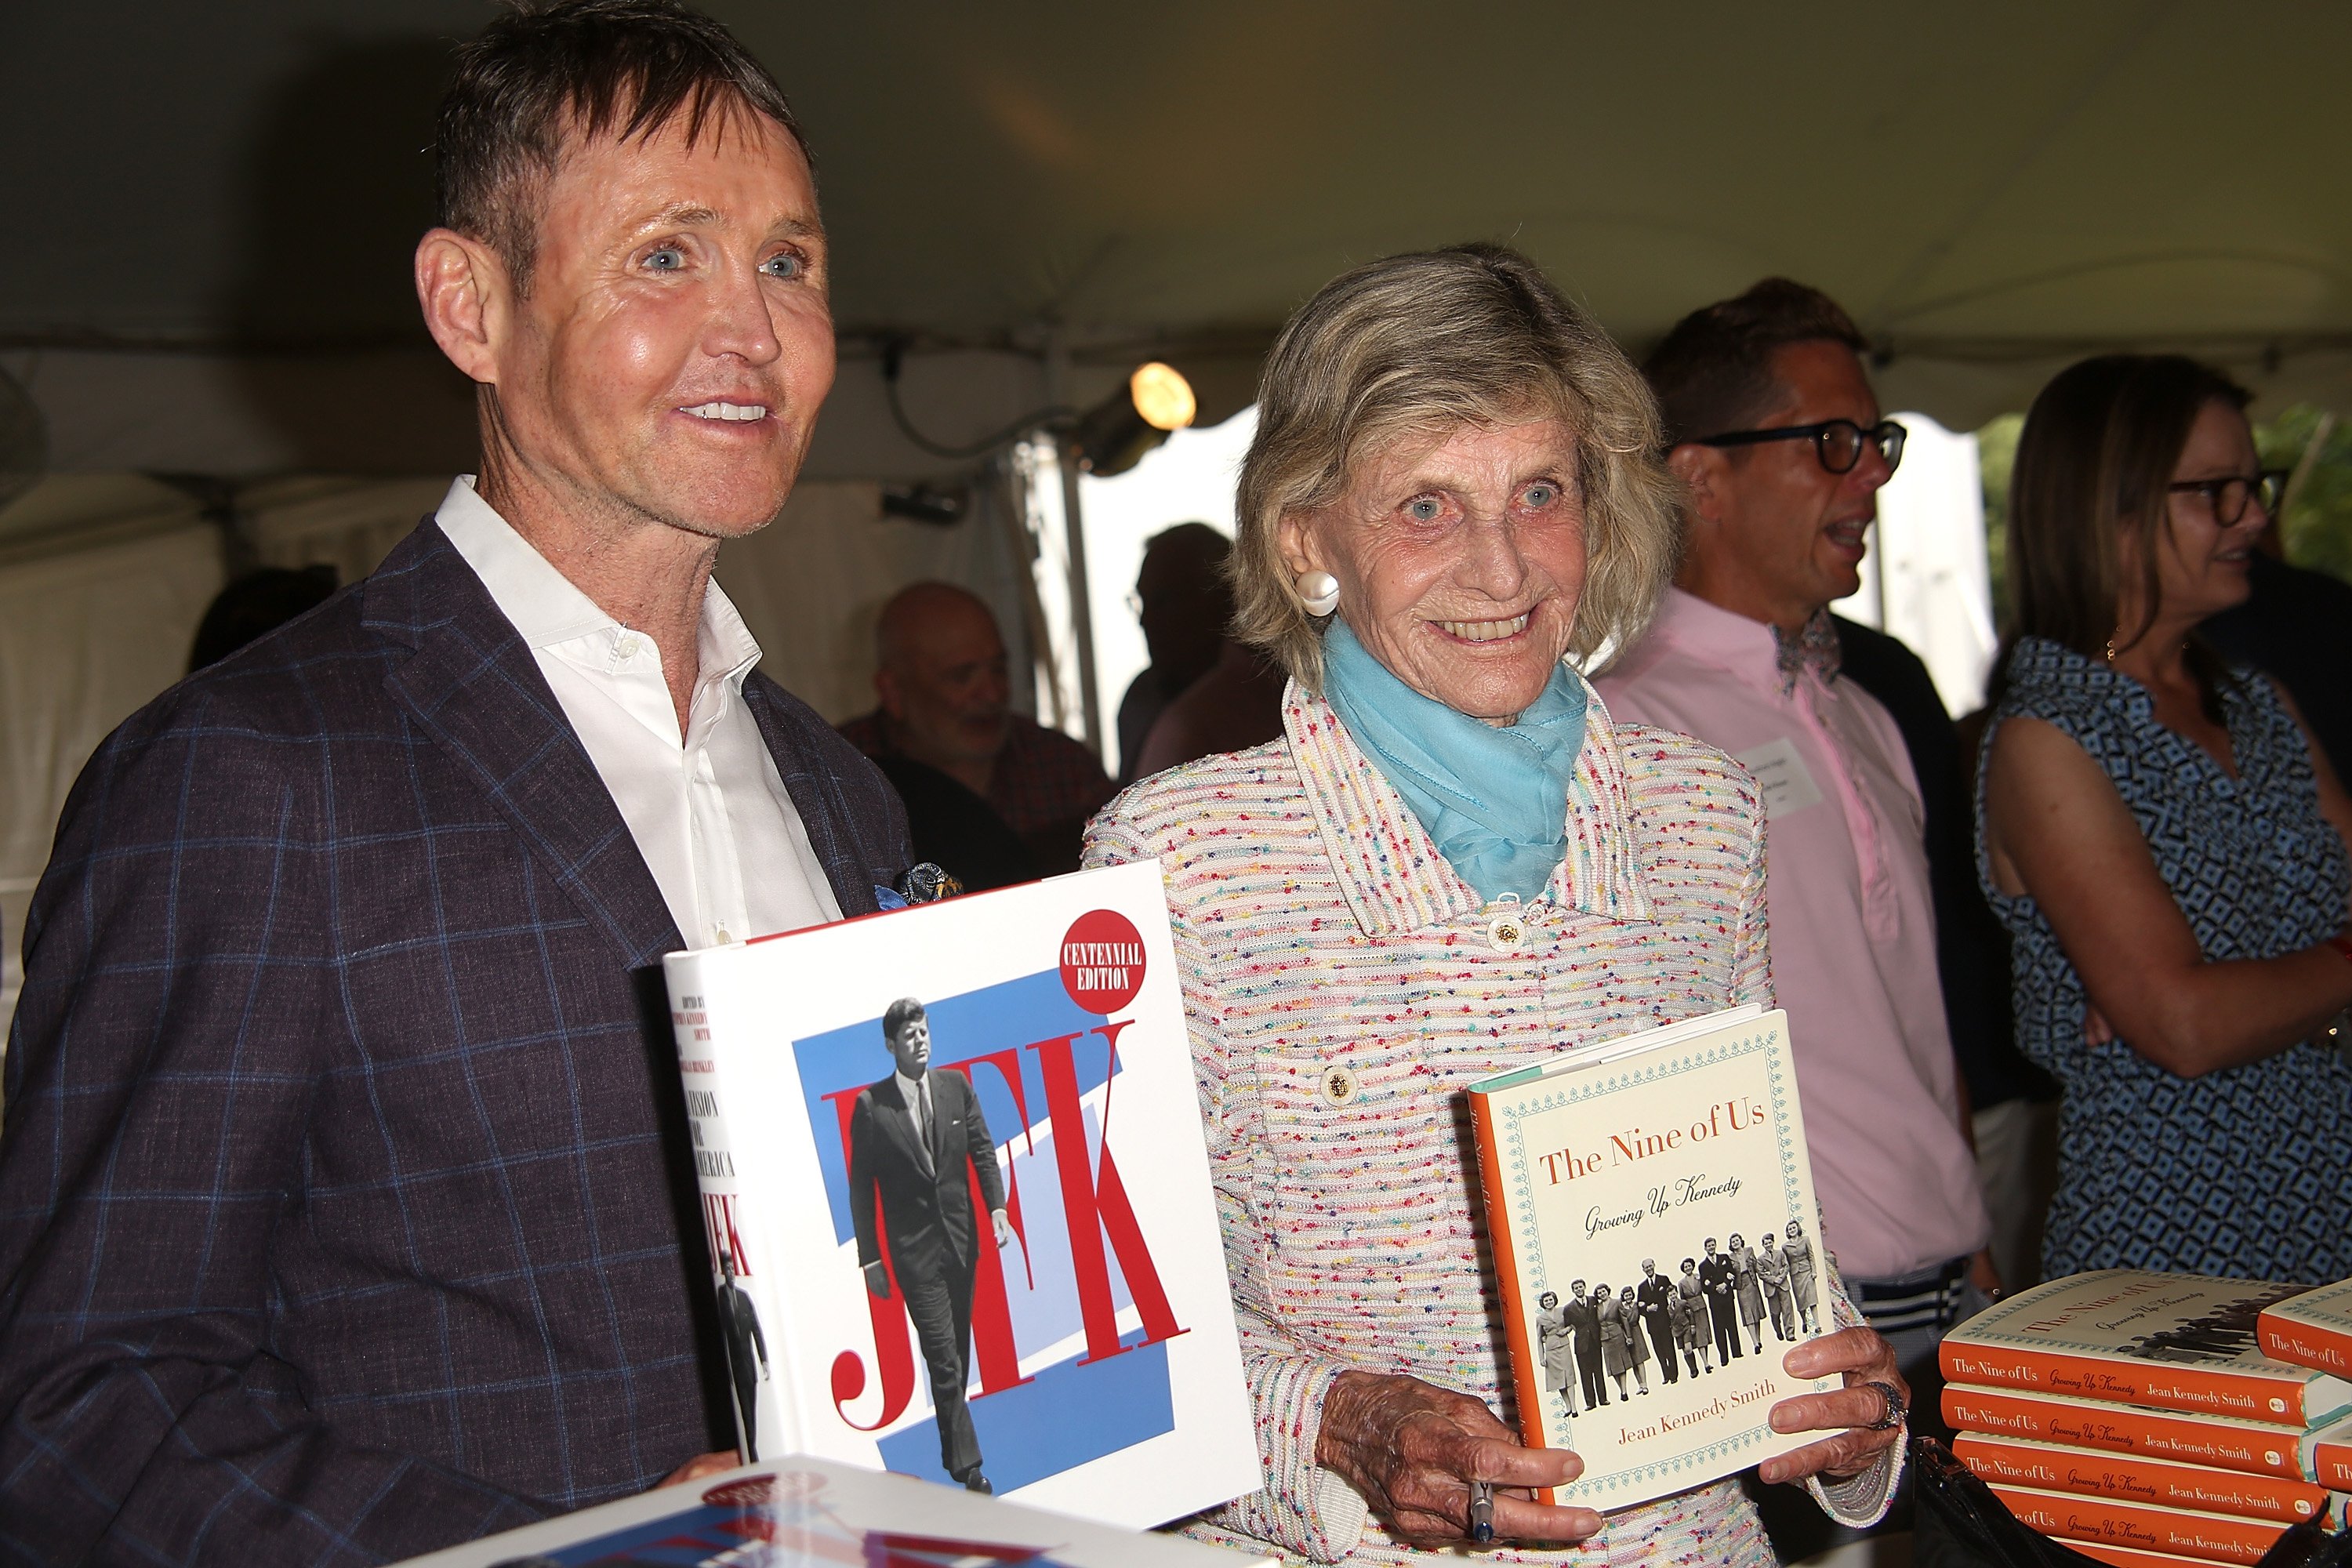 Stephen Kennedy Smith and Jean Kennedy Smith attend Author's Night on August 12, 2017 in East Hampton, New York | Photo: Getty Images